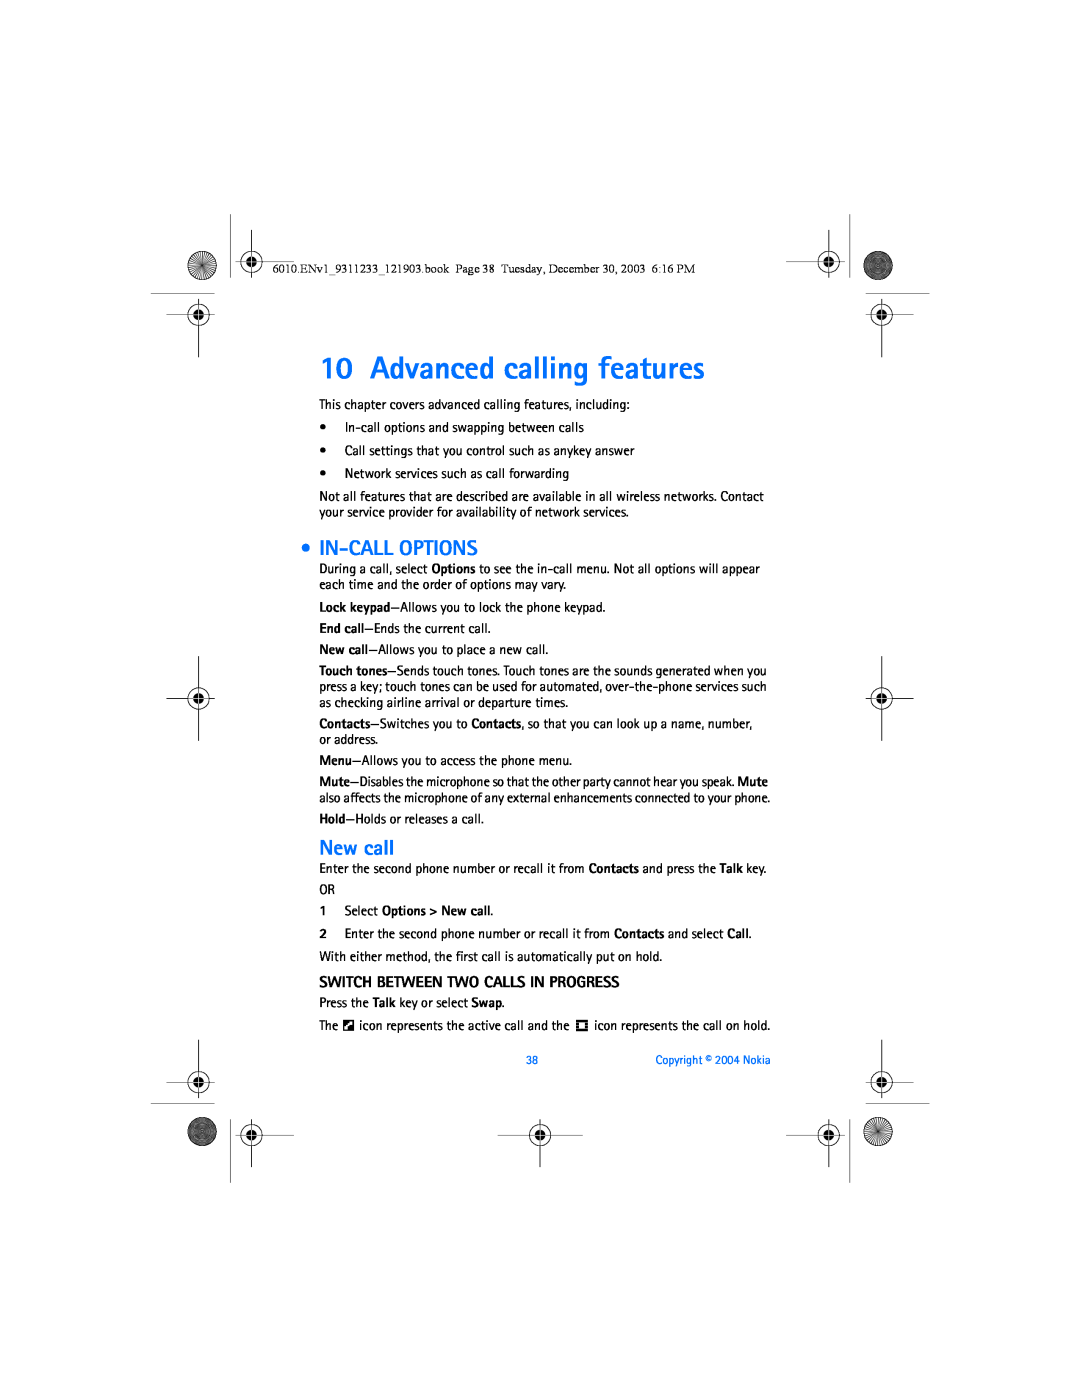 Nokia 6010 manual Advanced calling features, In-Call Options, New call, Switch Between Two Calls In Progress 